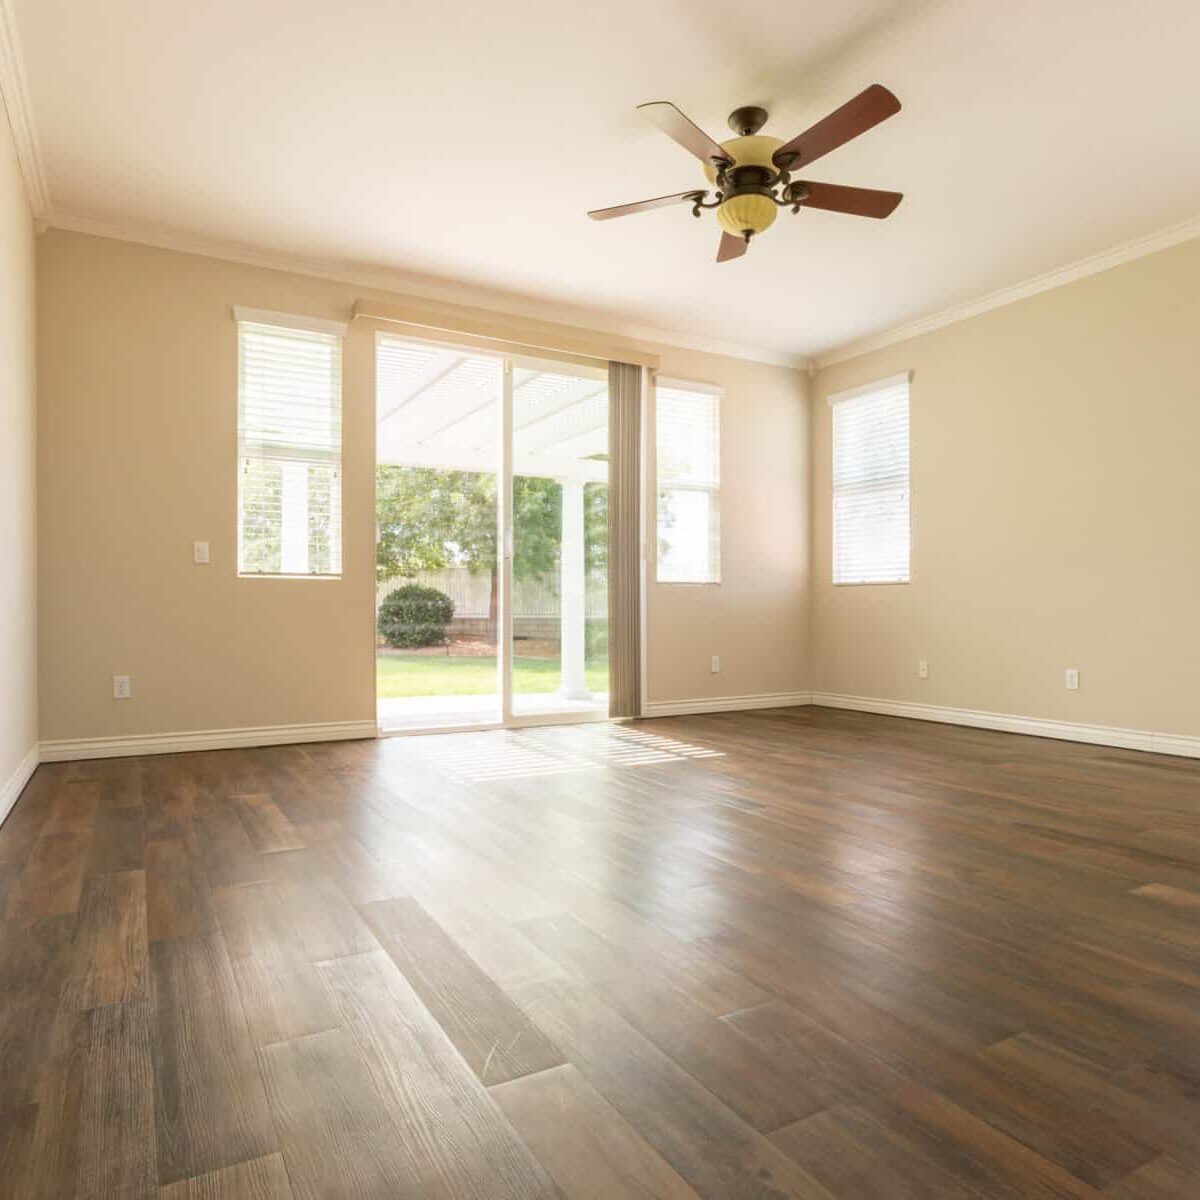 Room Of House with Finished Wood Floors.